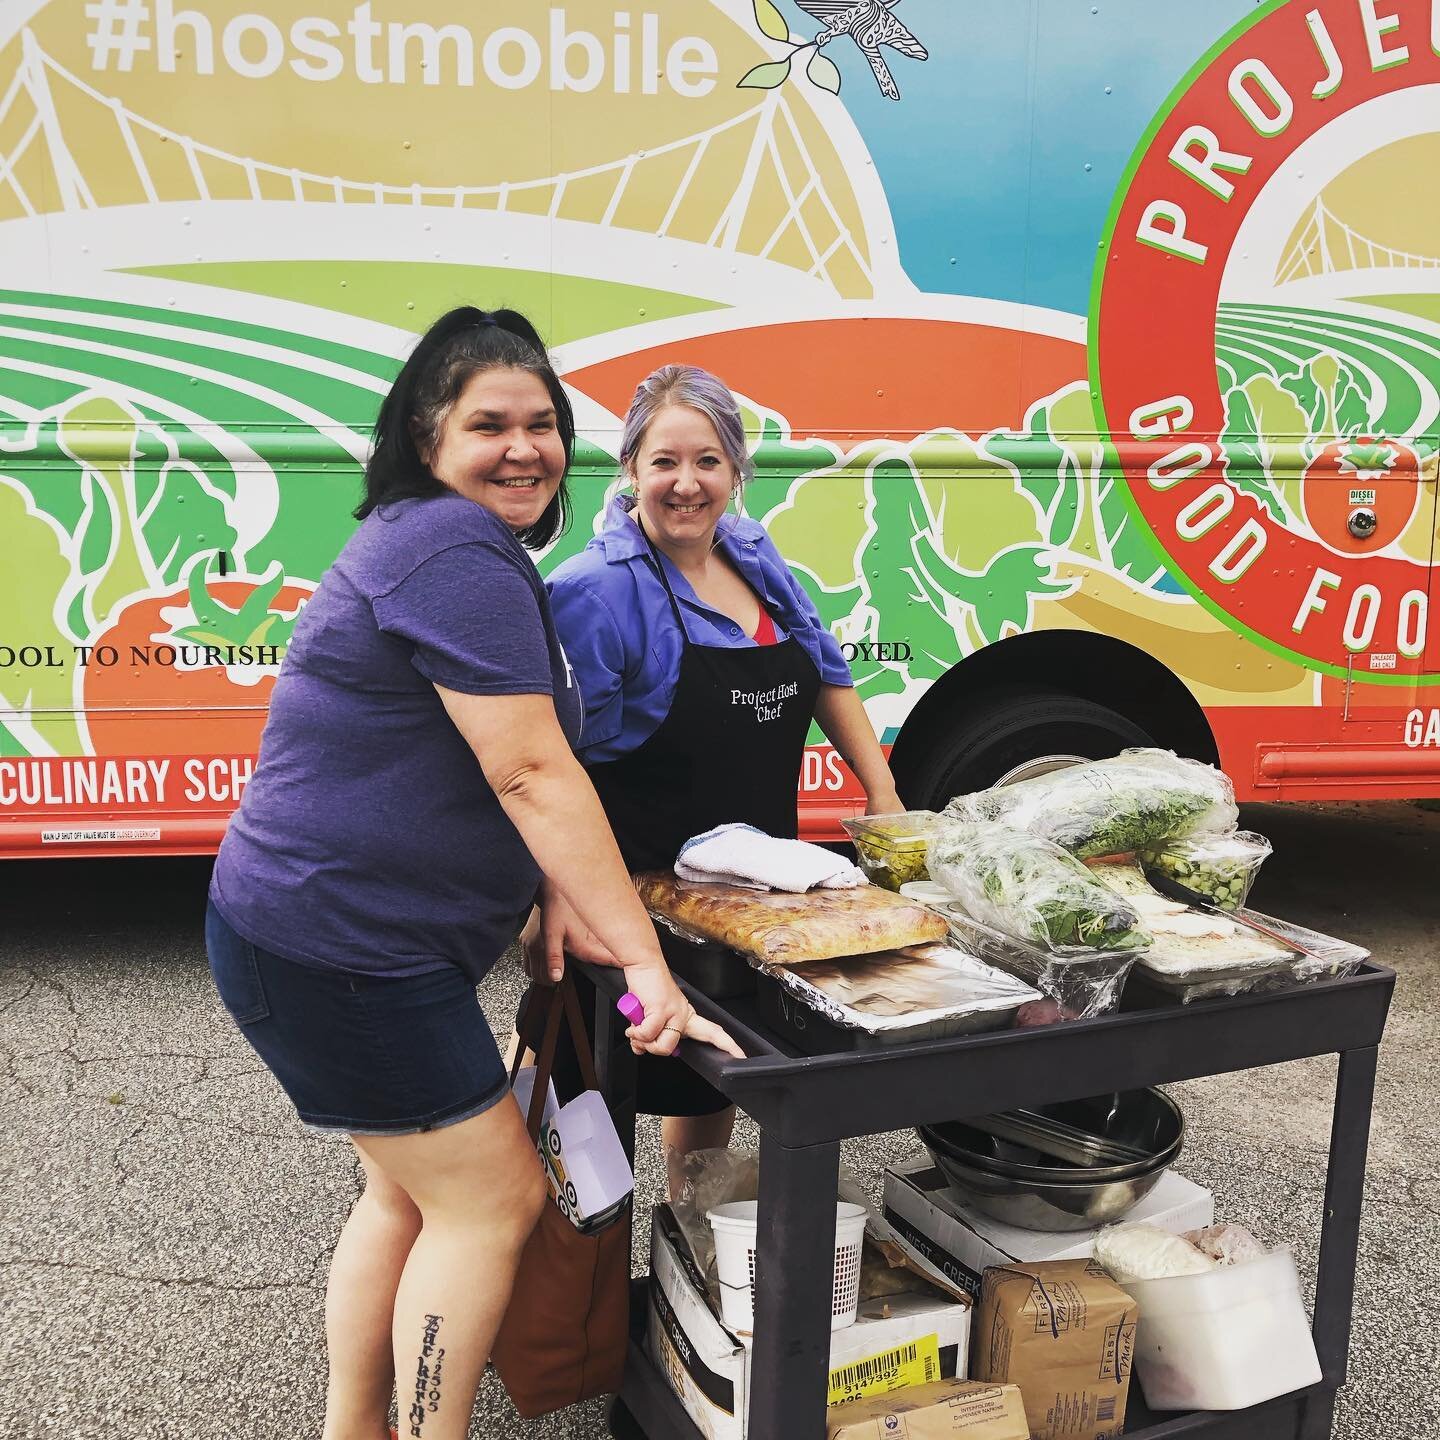 The dream team on their way to @travelerstaproom where you can find them on the #hostmobile right now!